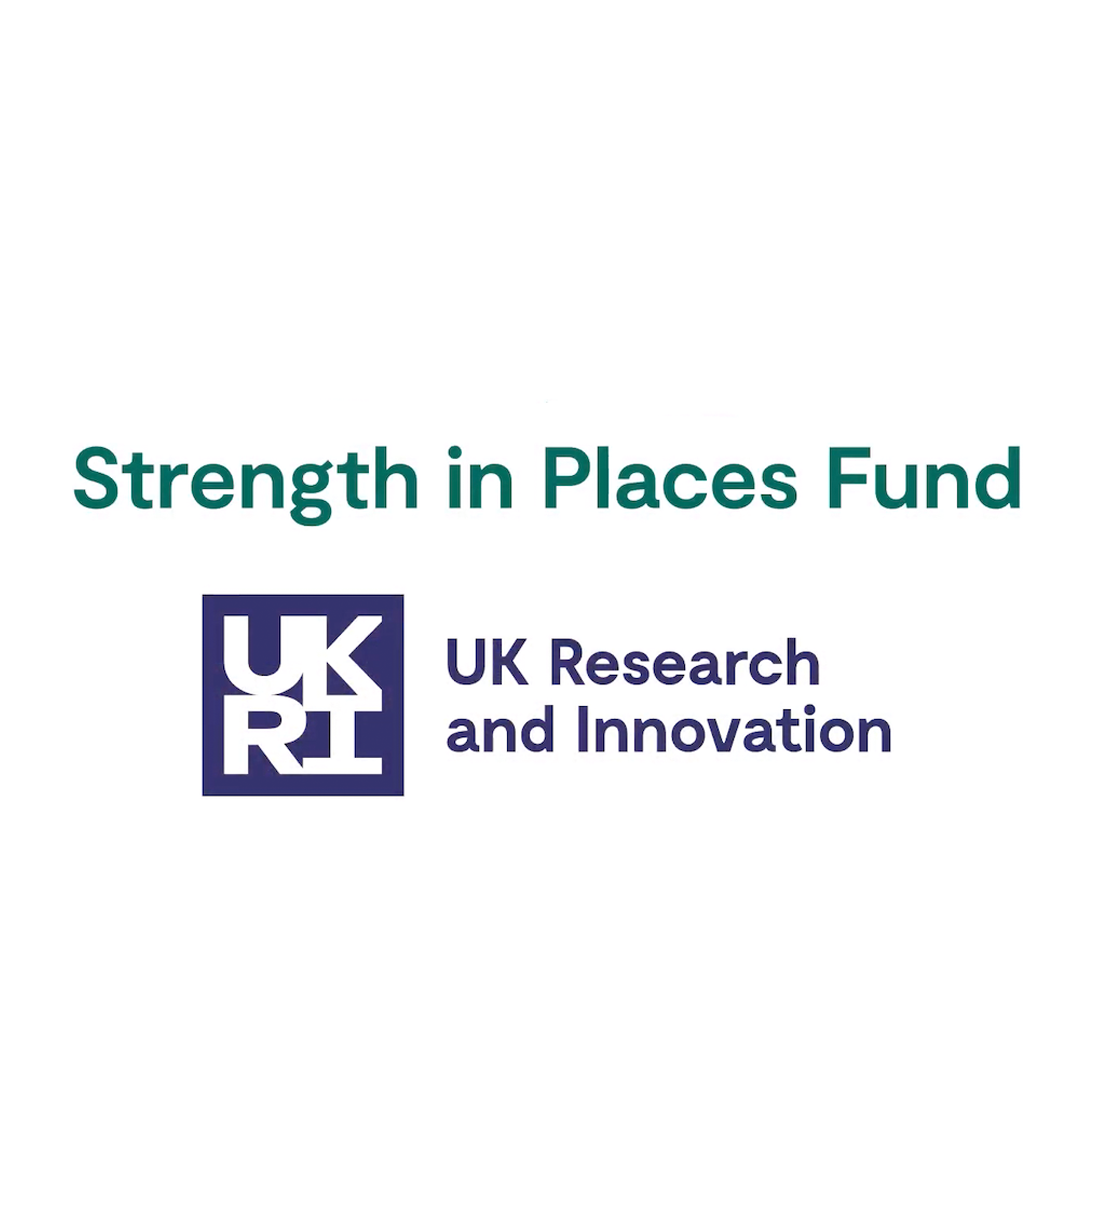 UKRI Strength in Places